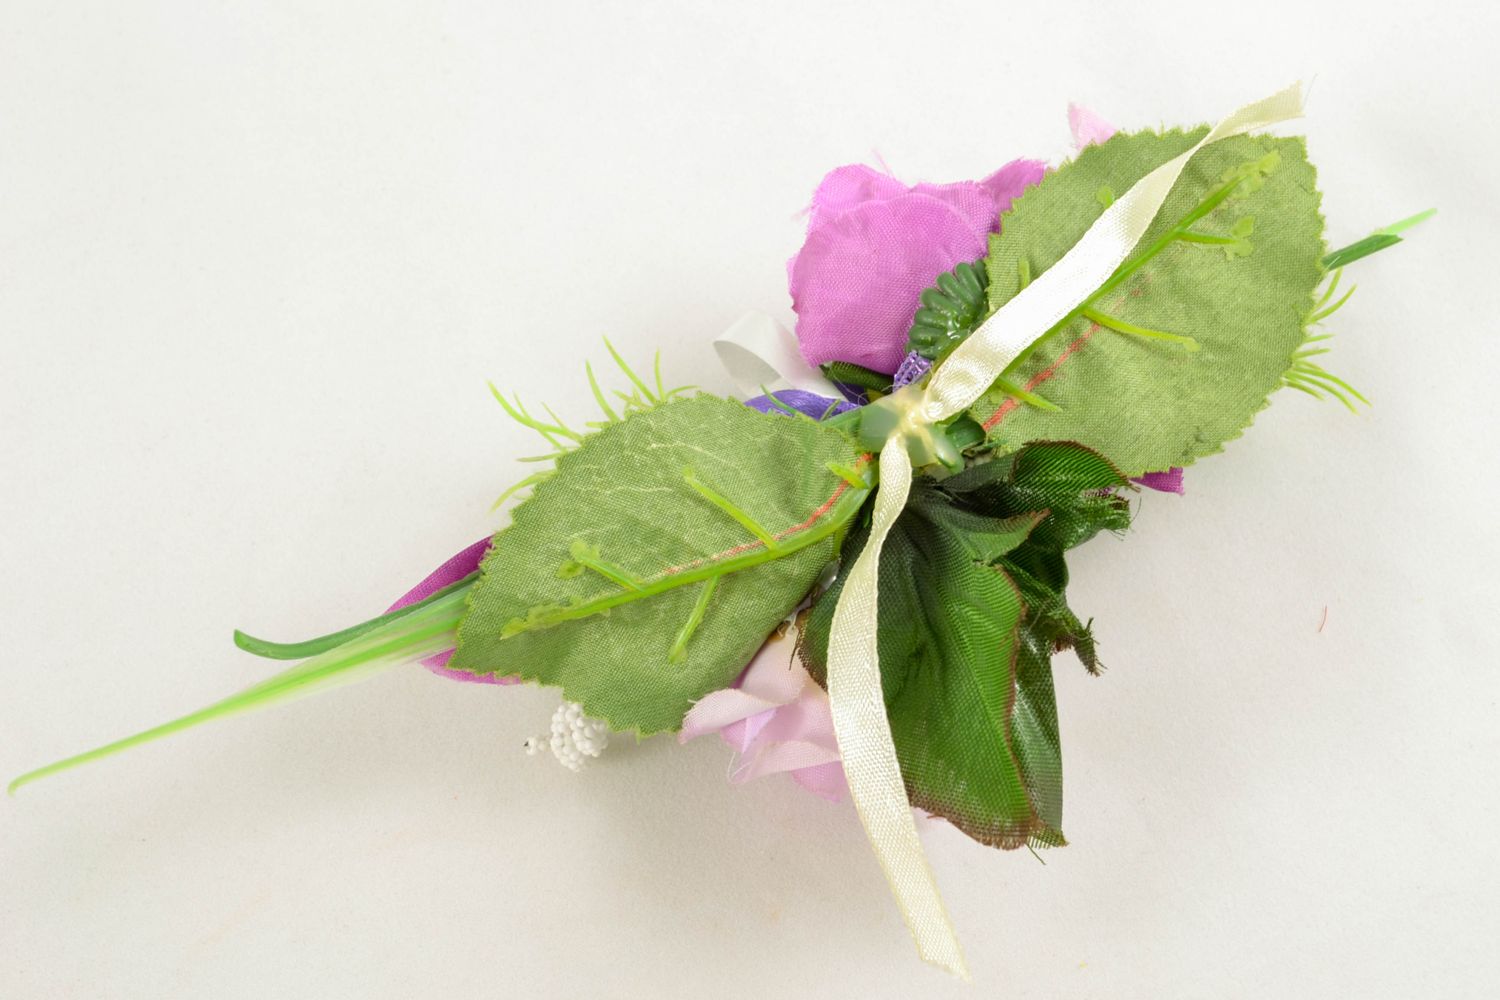 Boutonniere for an Easter basket
Wrist boutonniere photo 5